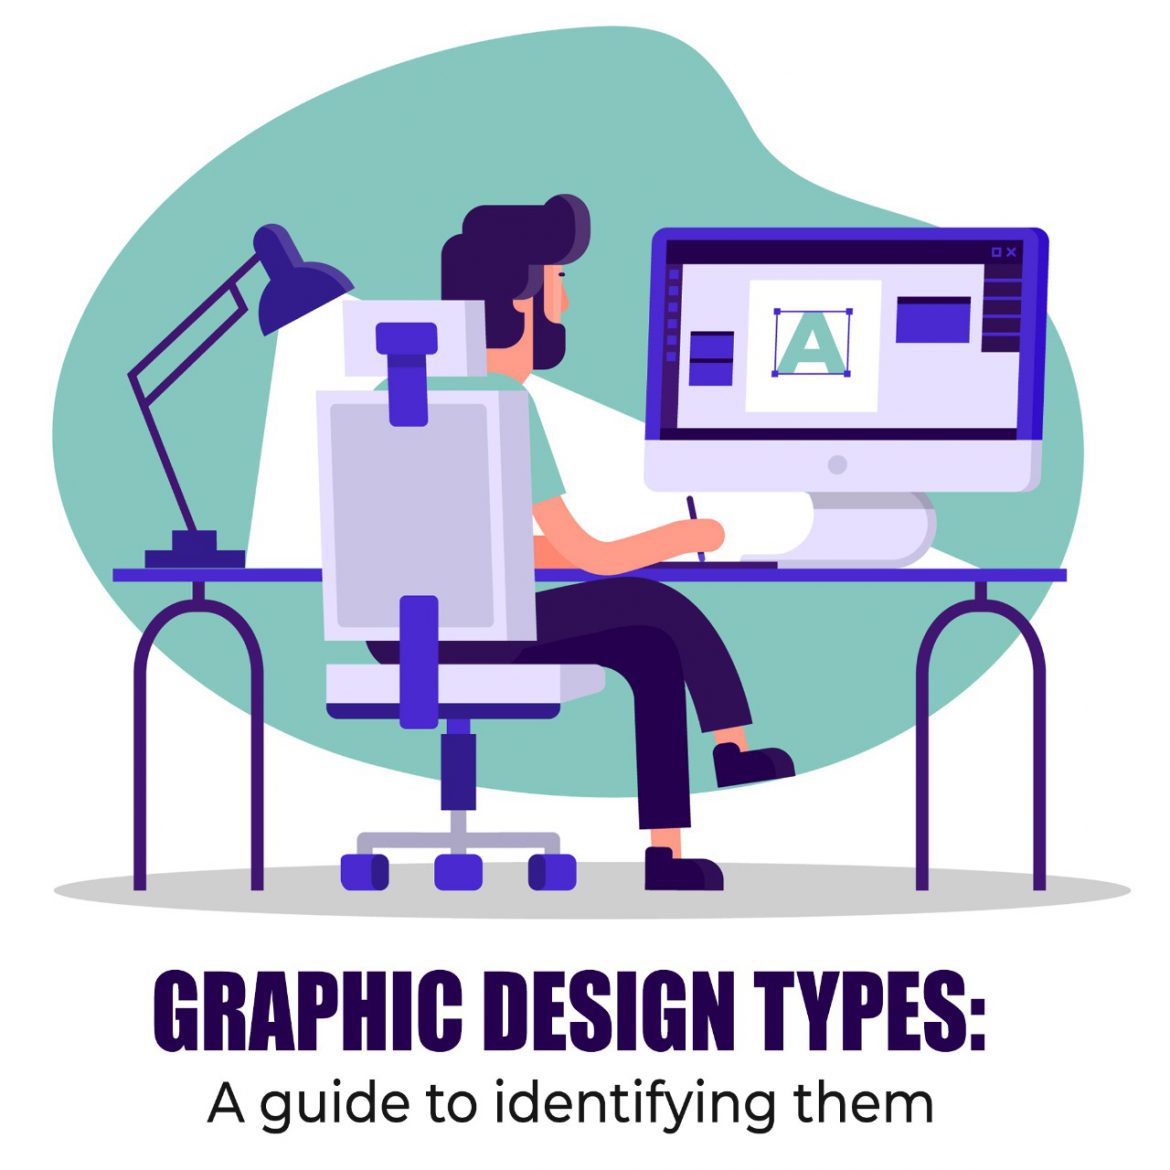 Graphic design types: a guide to identifying them